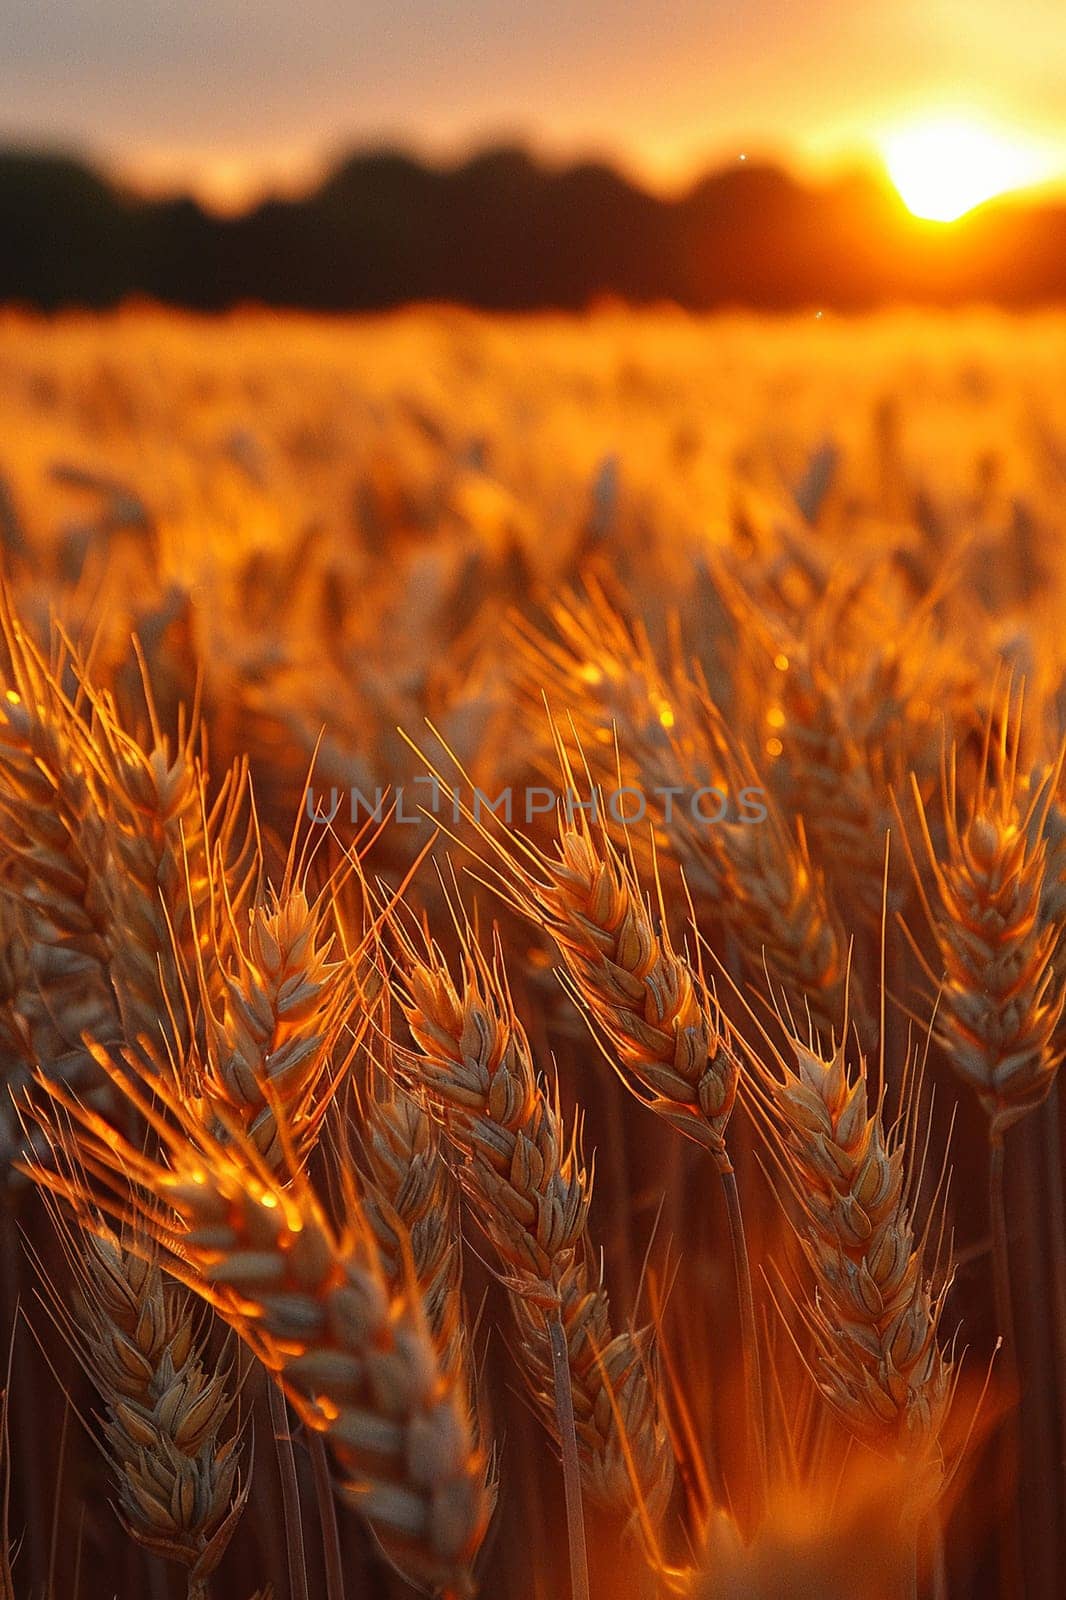 Golden Hour Over a Field of Wheat Ready for the Harvest The light blurs with the grain by Benzoix